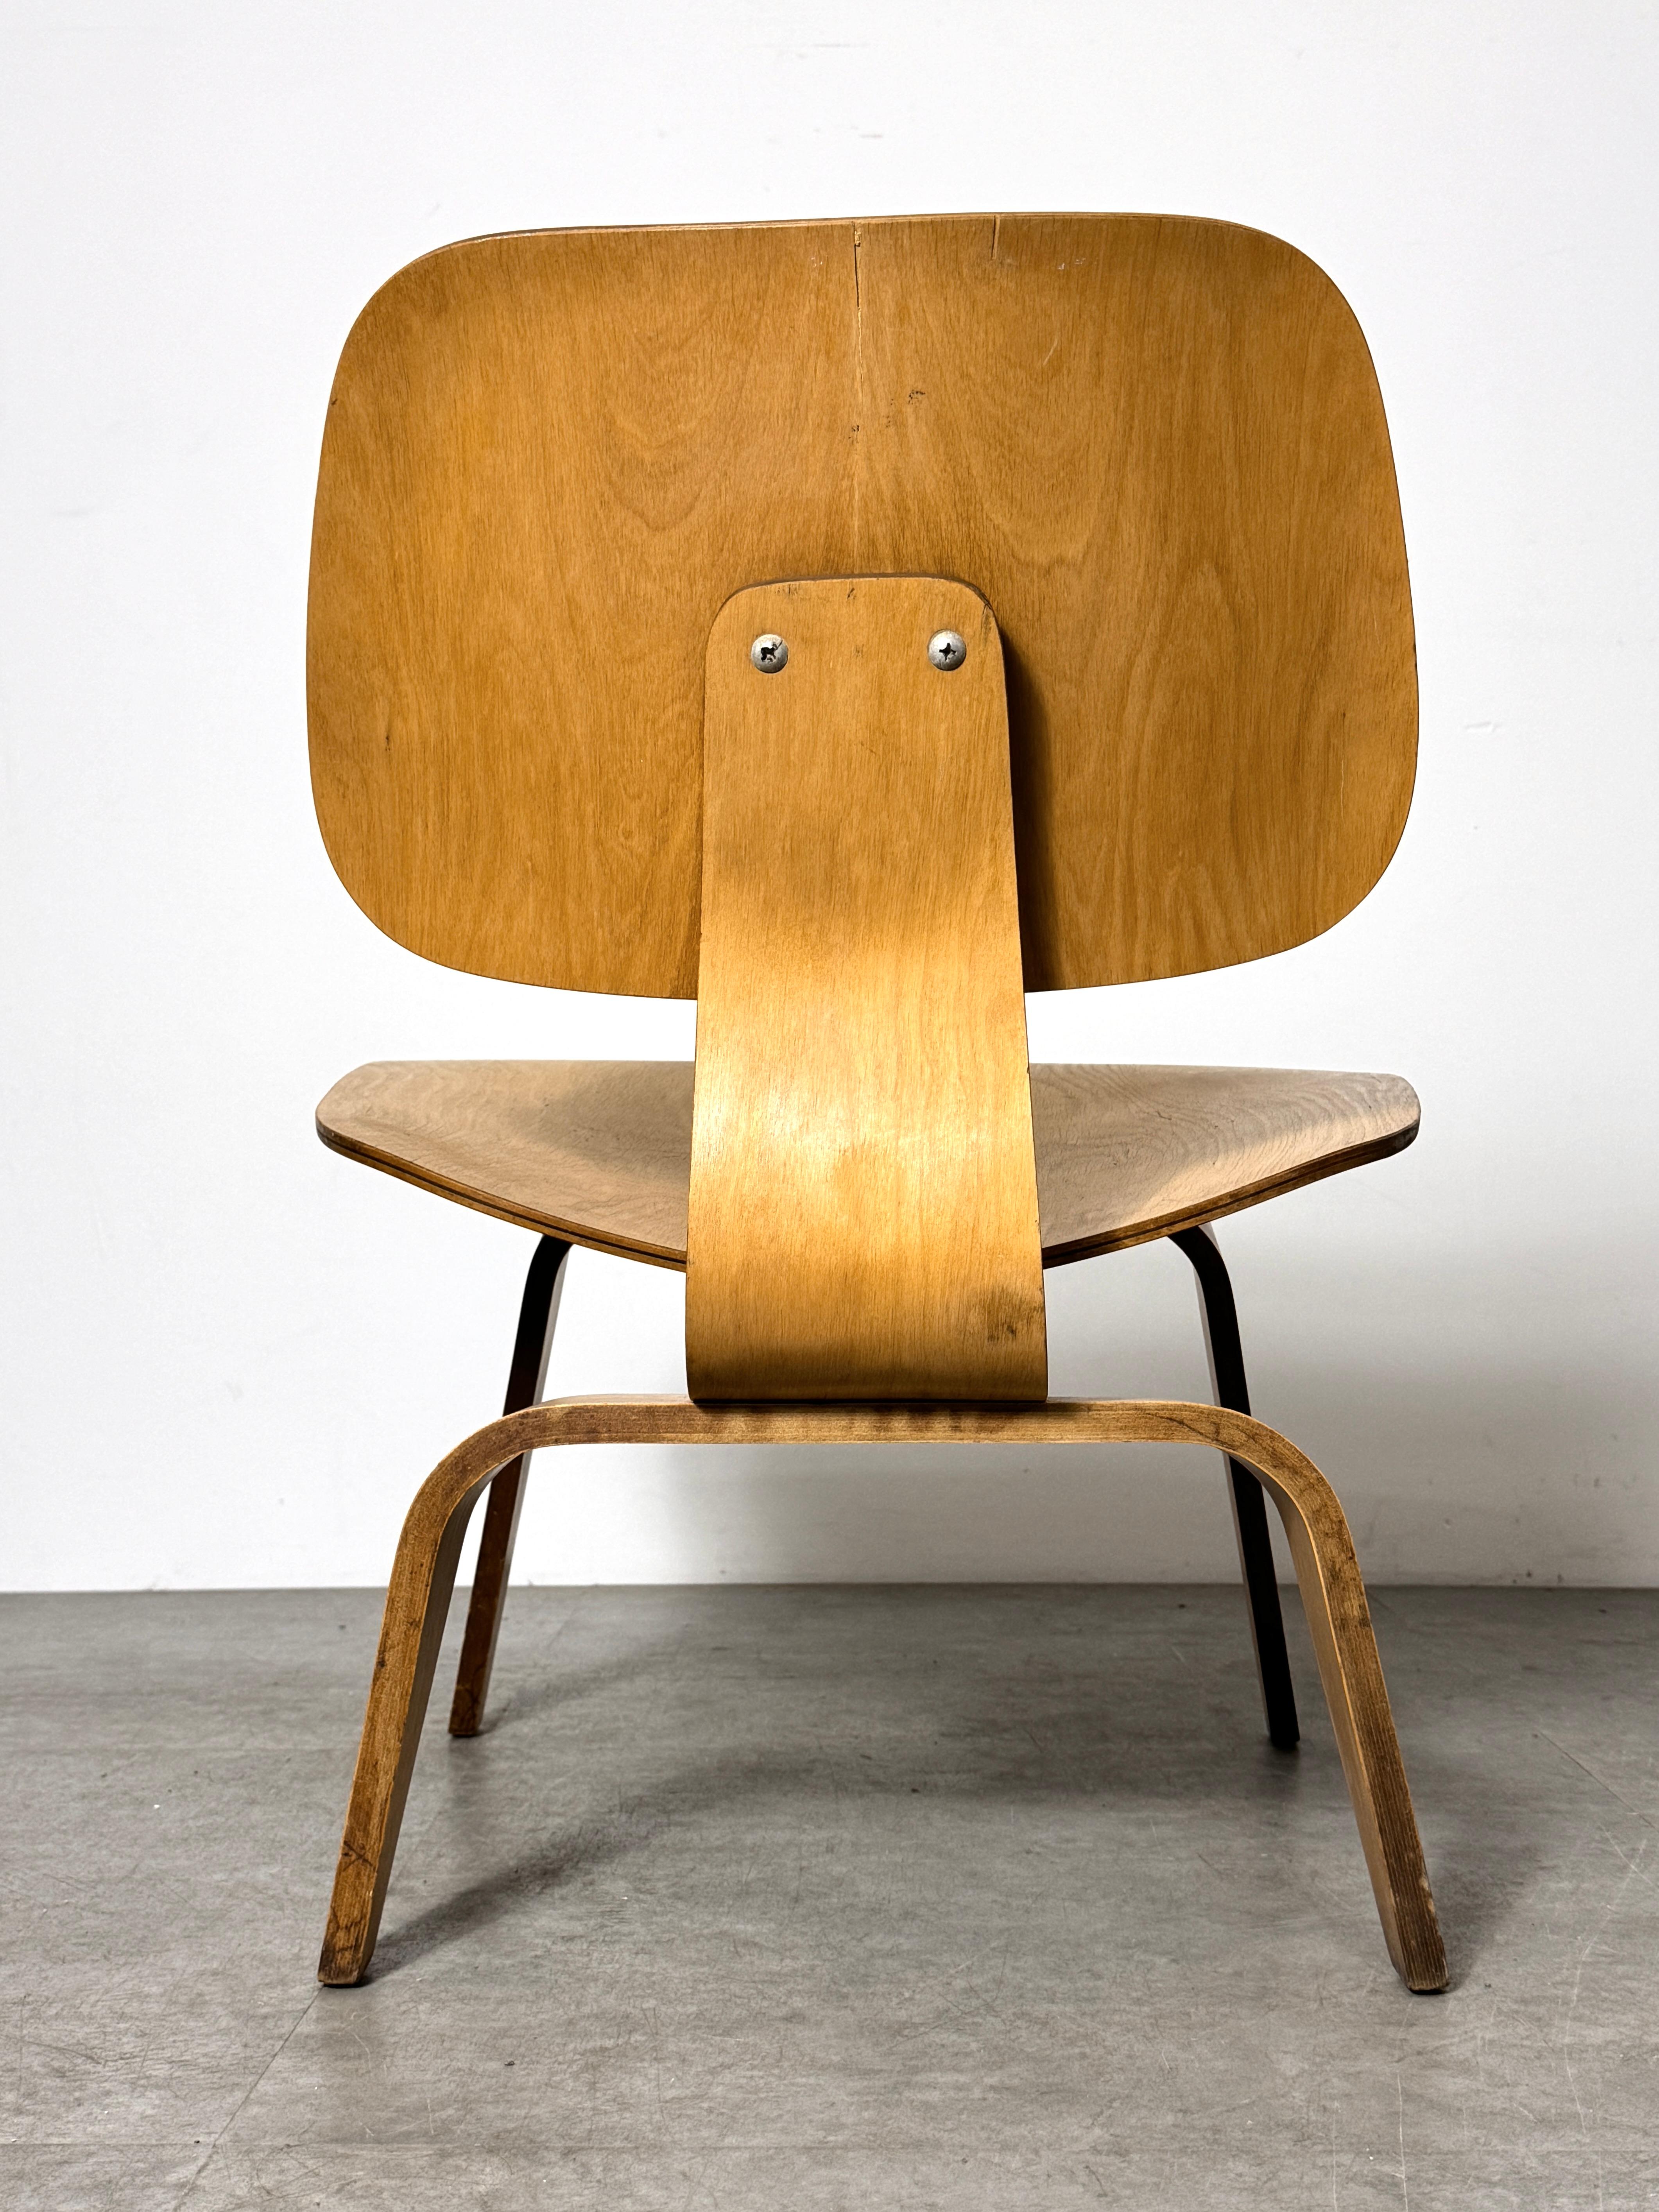 Early Vintage Charles Eames for Herman Miller LCW Birch Plywood Lounge Chair For Sale 2